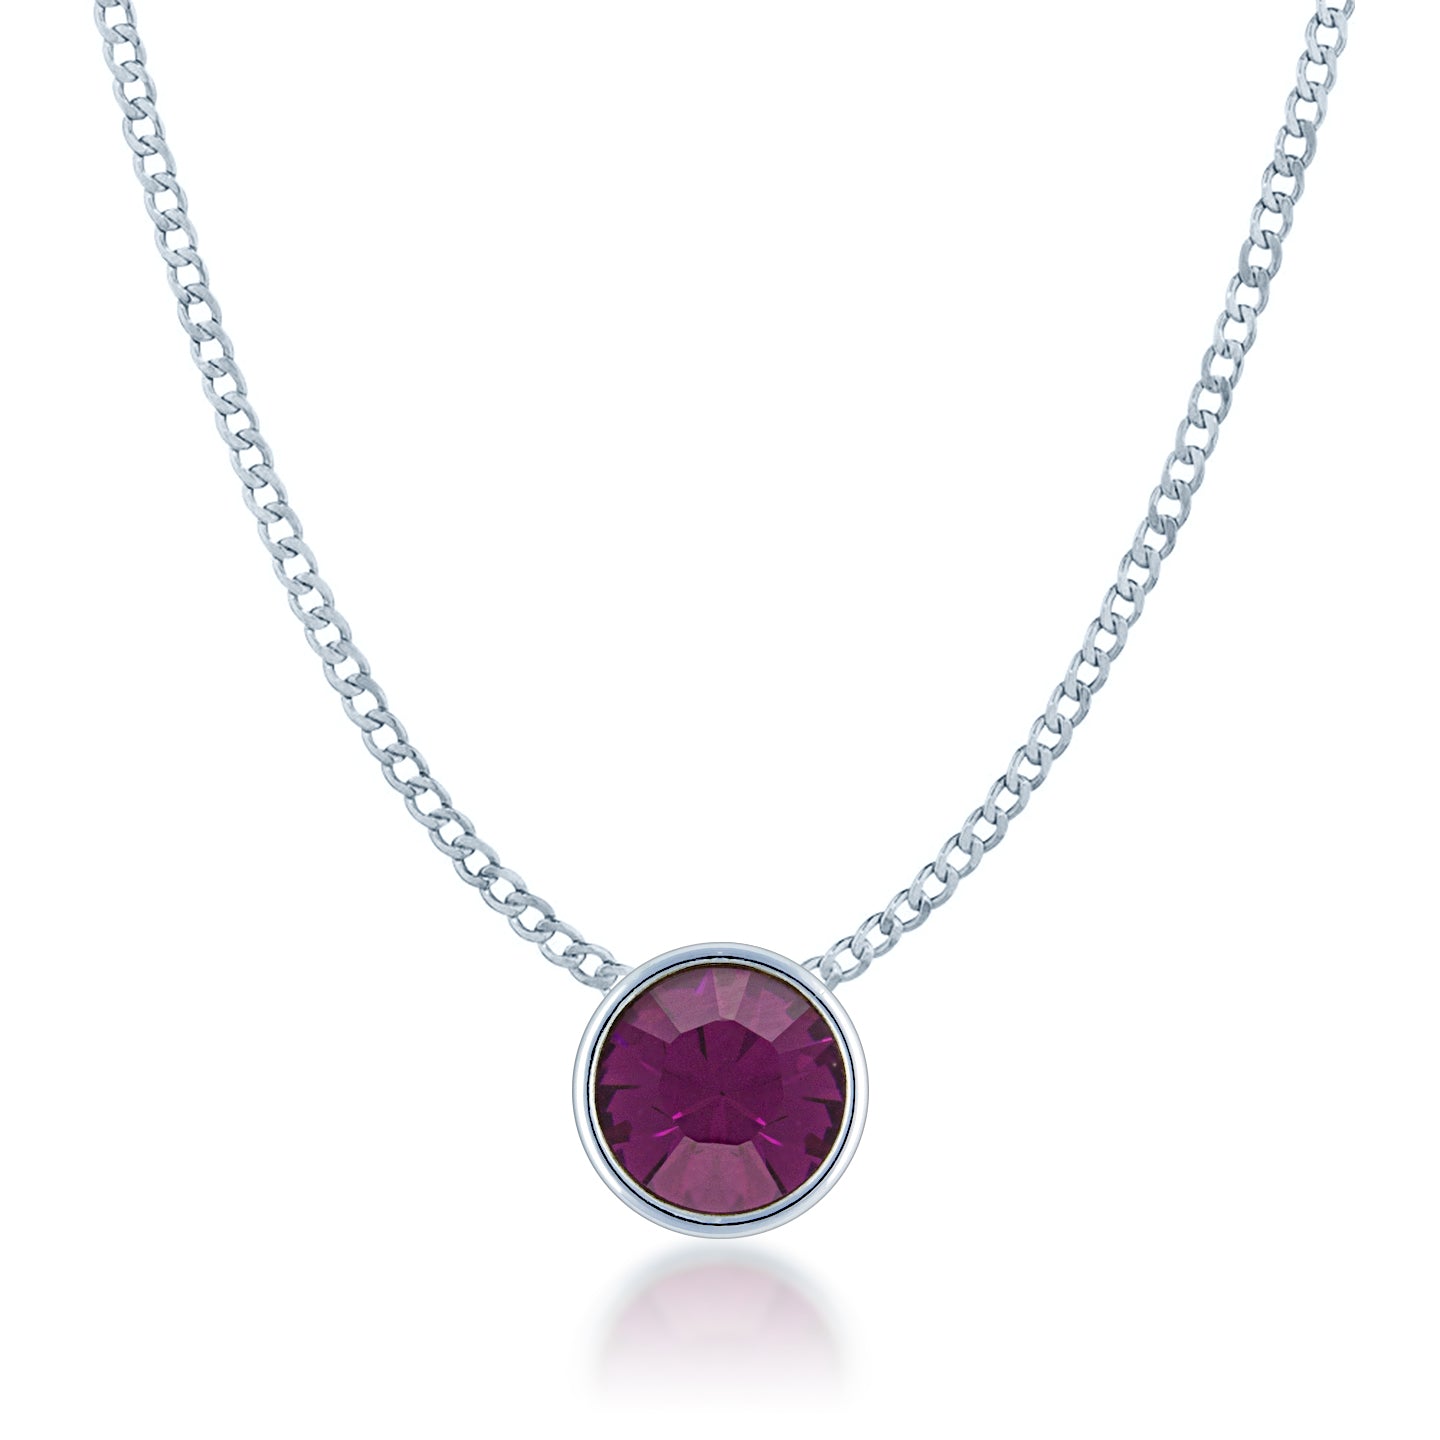 Harley Small Pendant Necklace with Purple Amethyst Round Crystals from Swarovski Silver Toned Rhodium Plated - Ed Heart